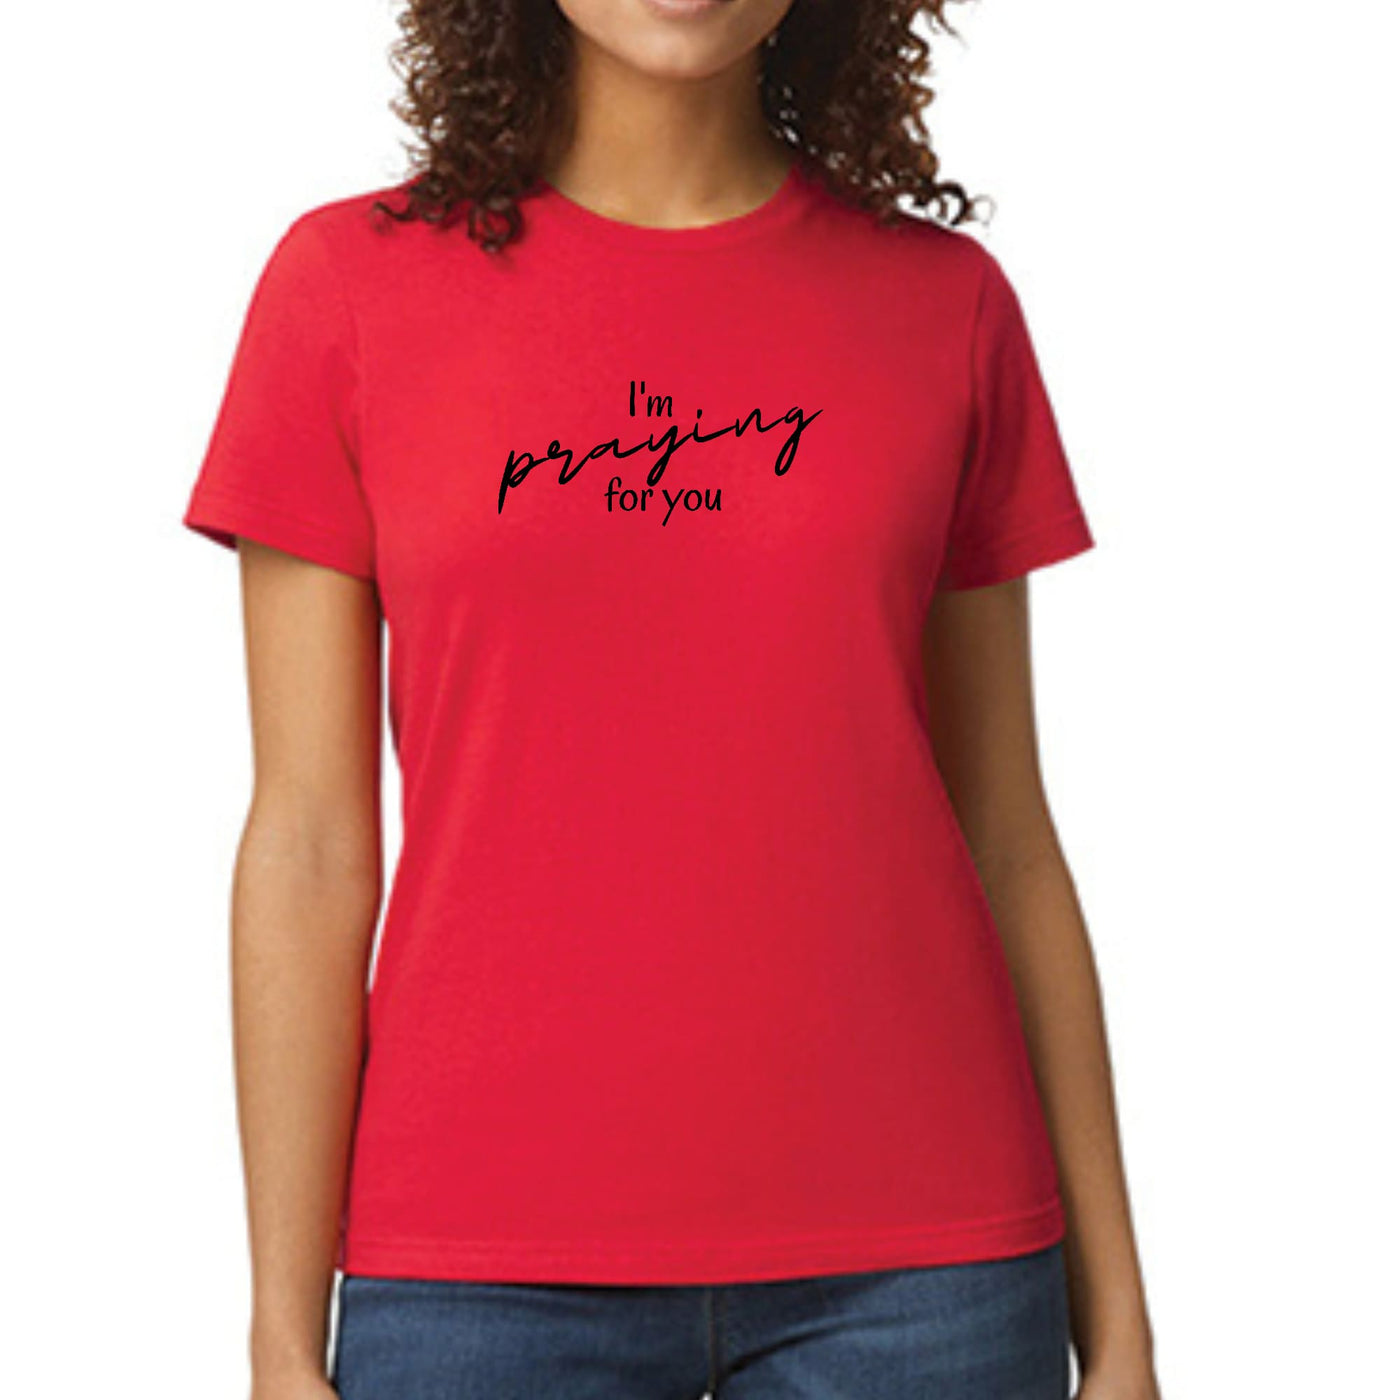 Womens Graphic T - shirt Say It Soul I’m Praying For You Illustration, - T